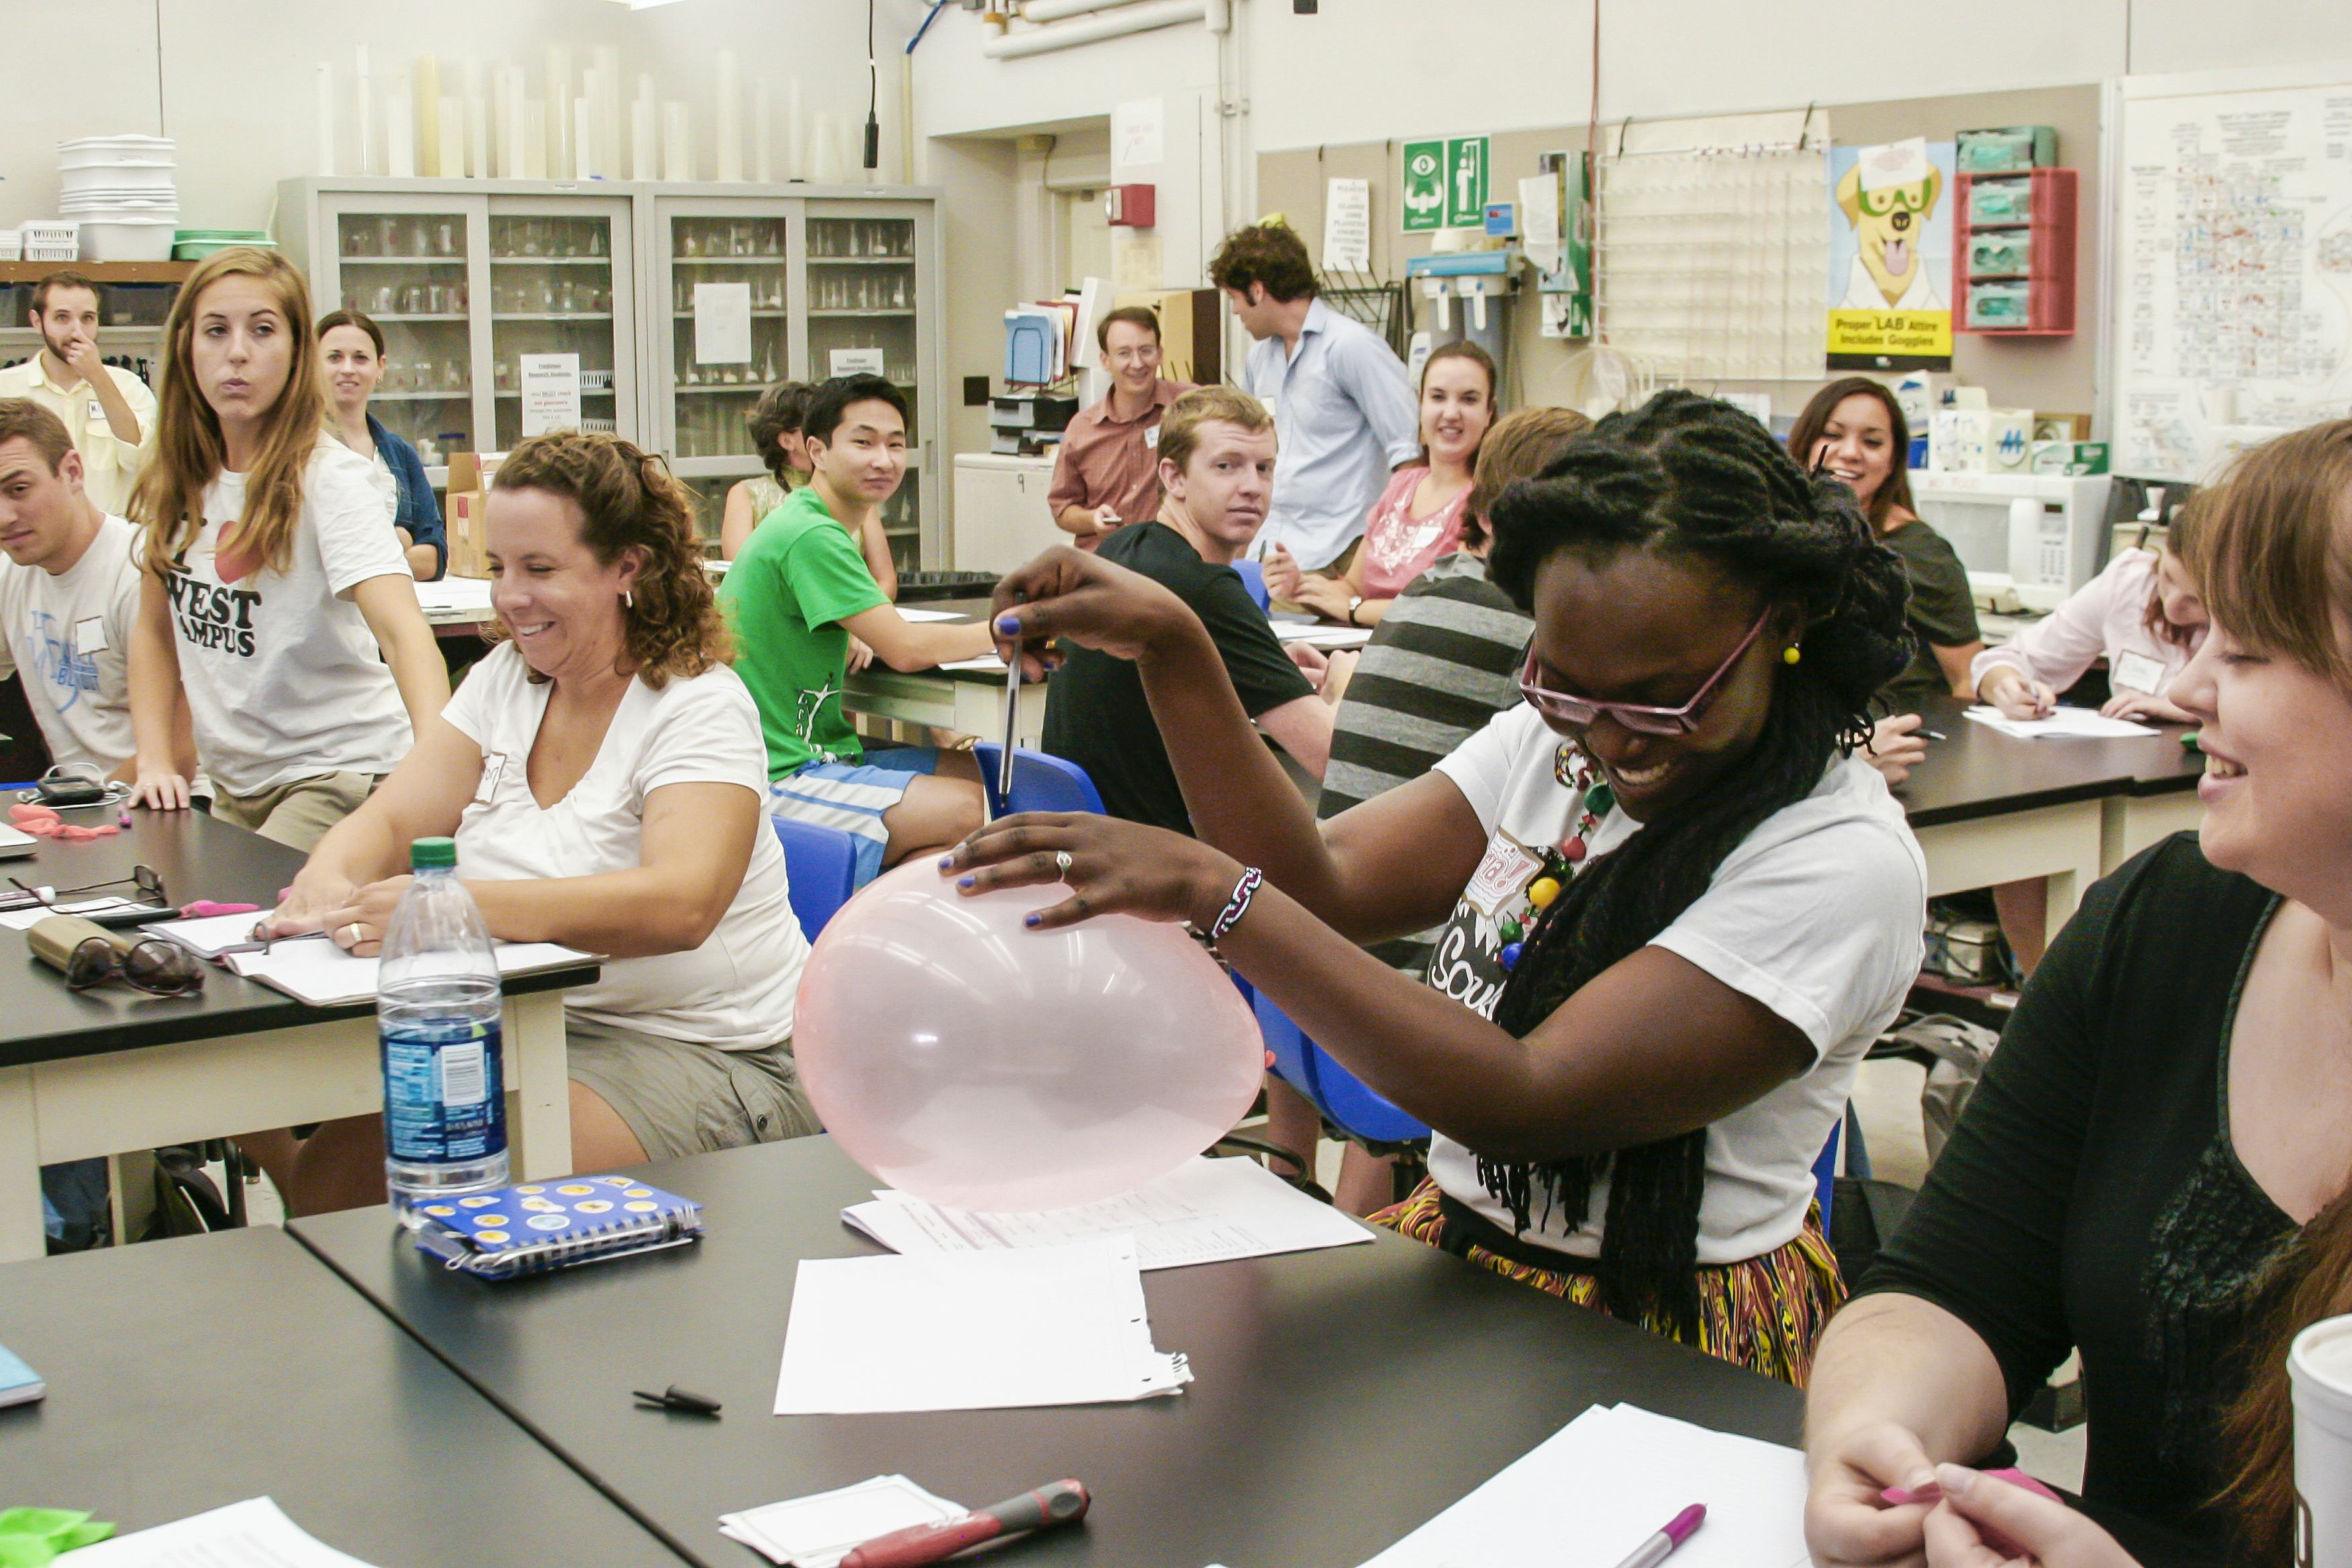 A young woman in a class practices an experiment with a balloon and looks afraid it will pop while peers look on